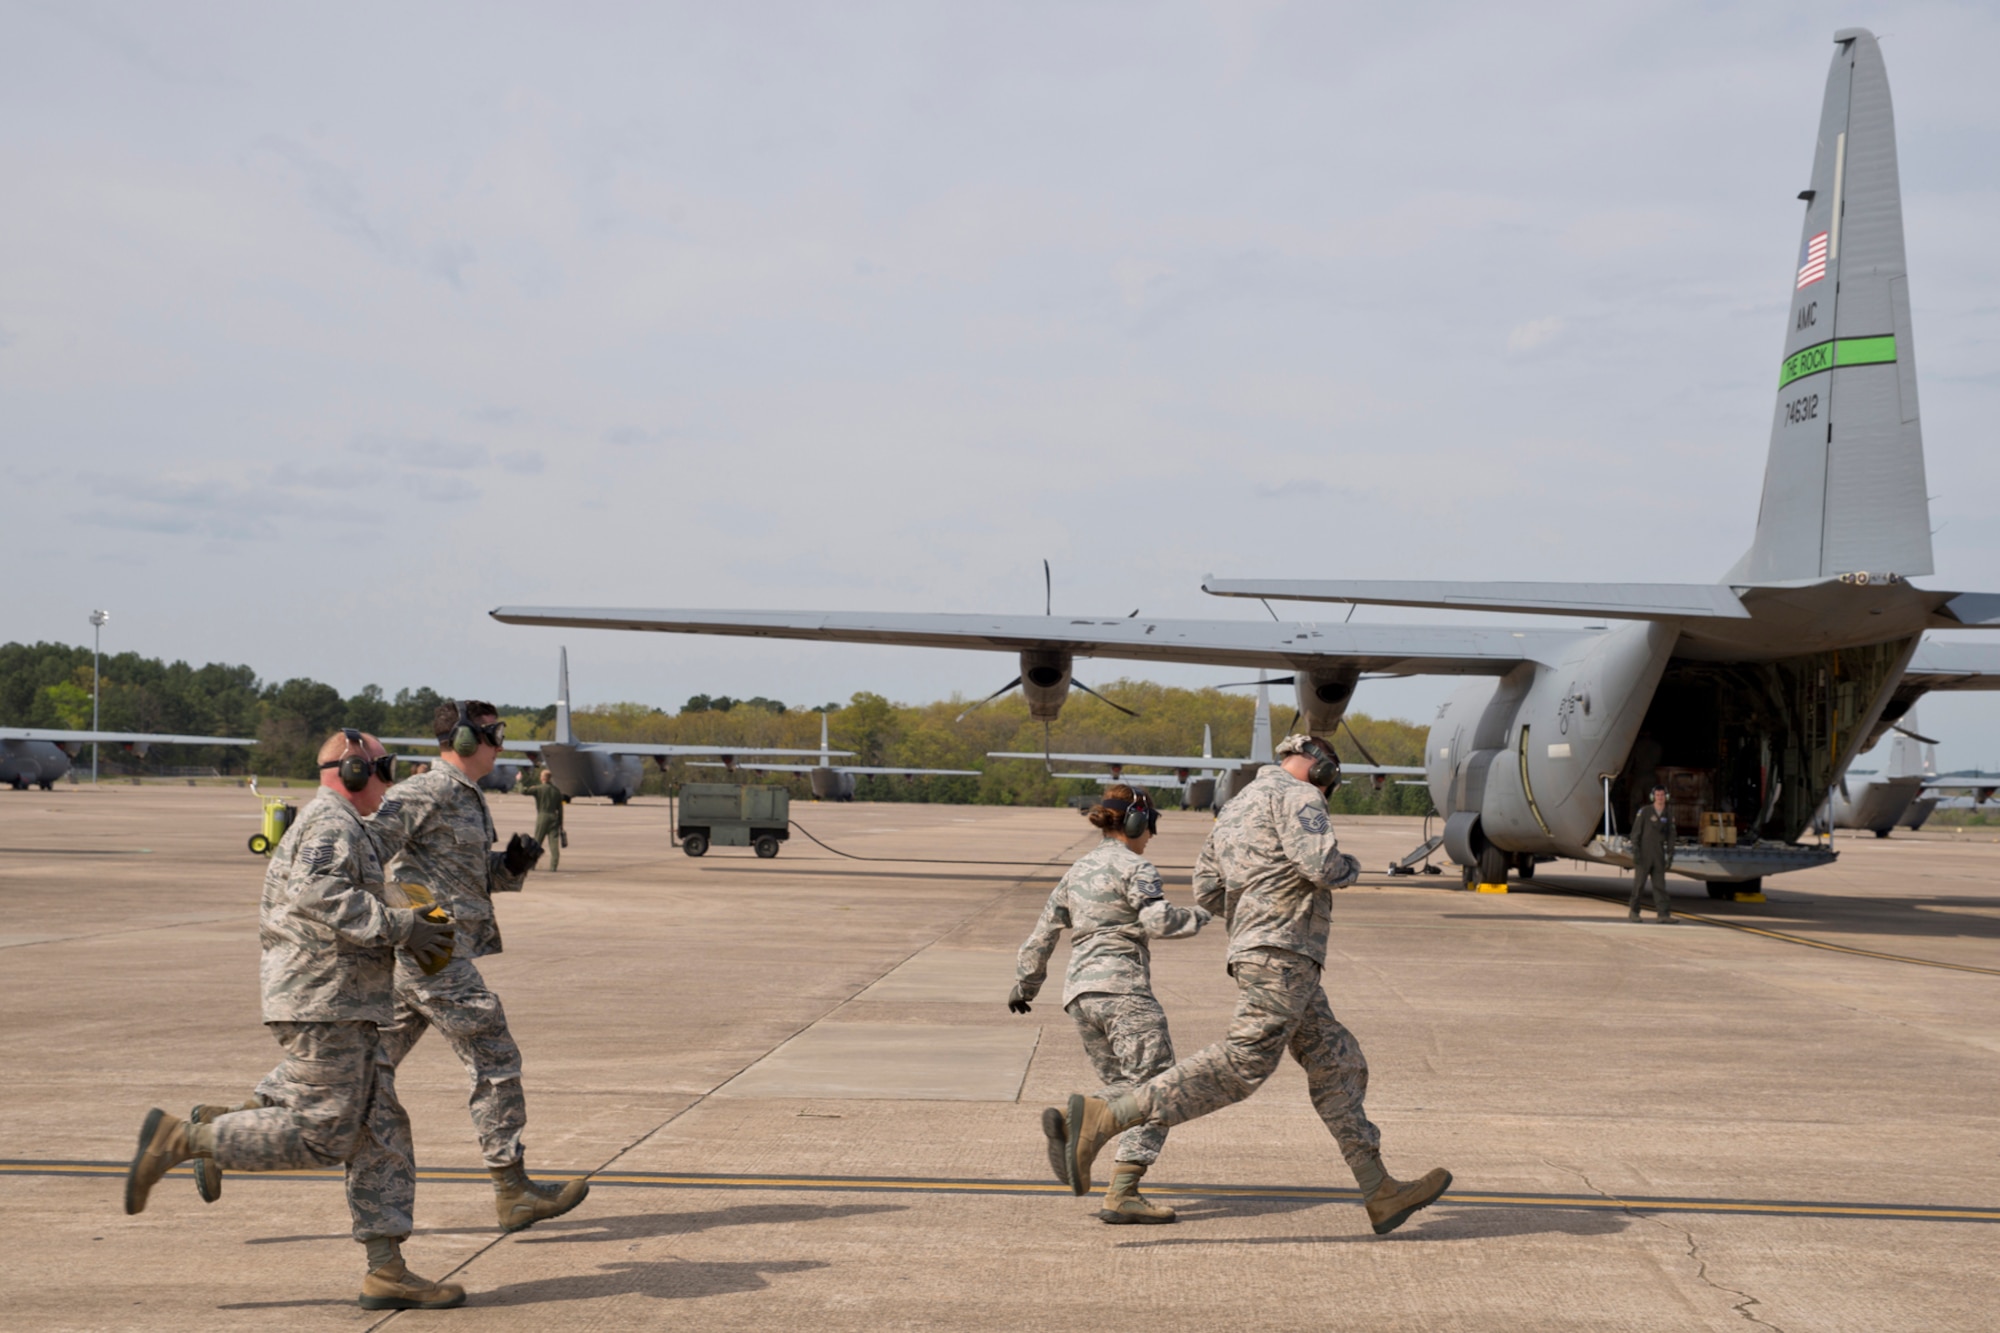 (Left to Right) U.S. Air Force Reserve Tech Sgt. Jason Gibson, Tech Sgt. Danny Canup, Tech Sgt. Kristen Garrett and Master Sgt. Morgan Abner race to a C-130J Super Hercules, where they will unload what they just loaded, in preparation for the 2017 Port Dawg Challenge for air mobility professionals. The competition, which the 96 APS won in 2012, will be held at Dobbins Air Reserve Base, Ga. (U.S. Air Force photo by Master Sgt. Jeff Walston/Released)